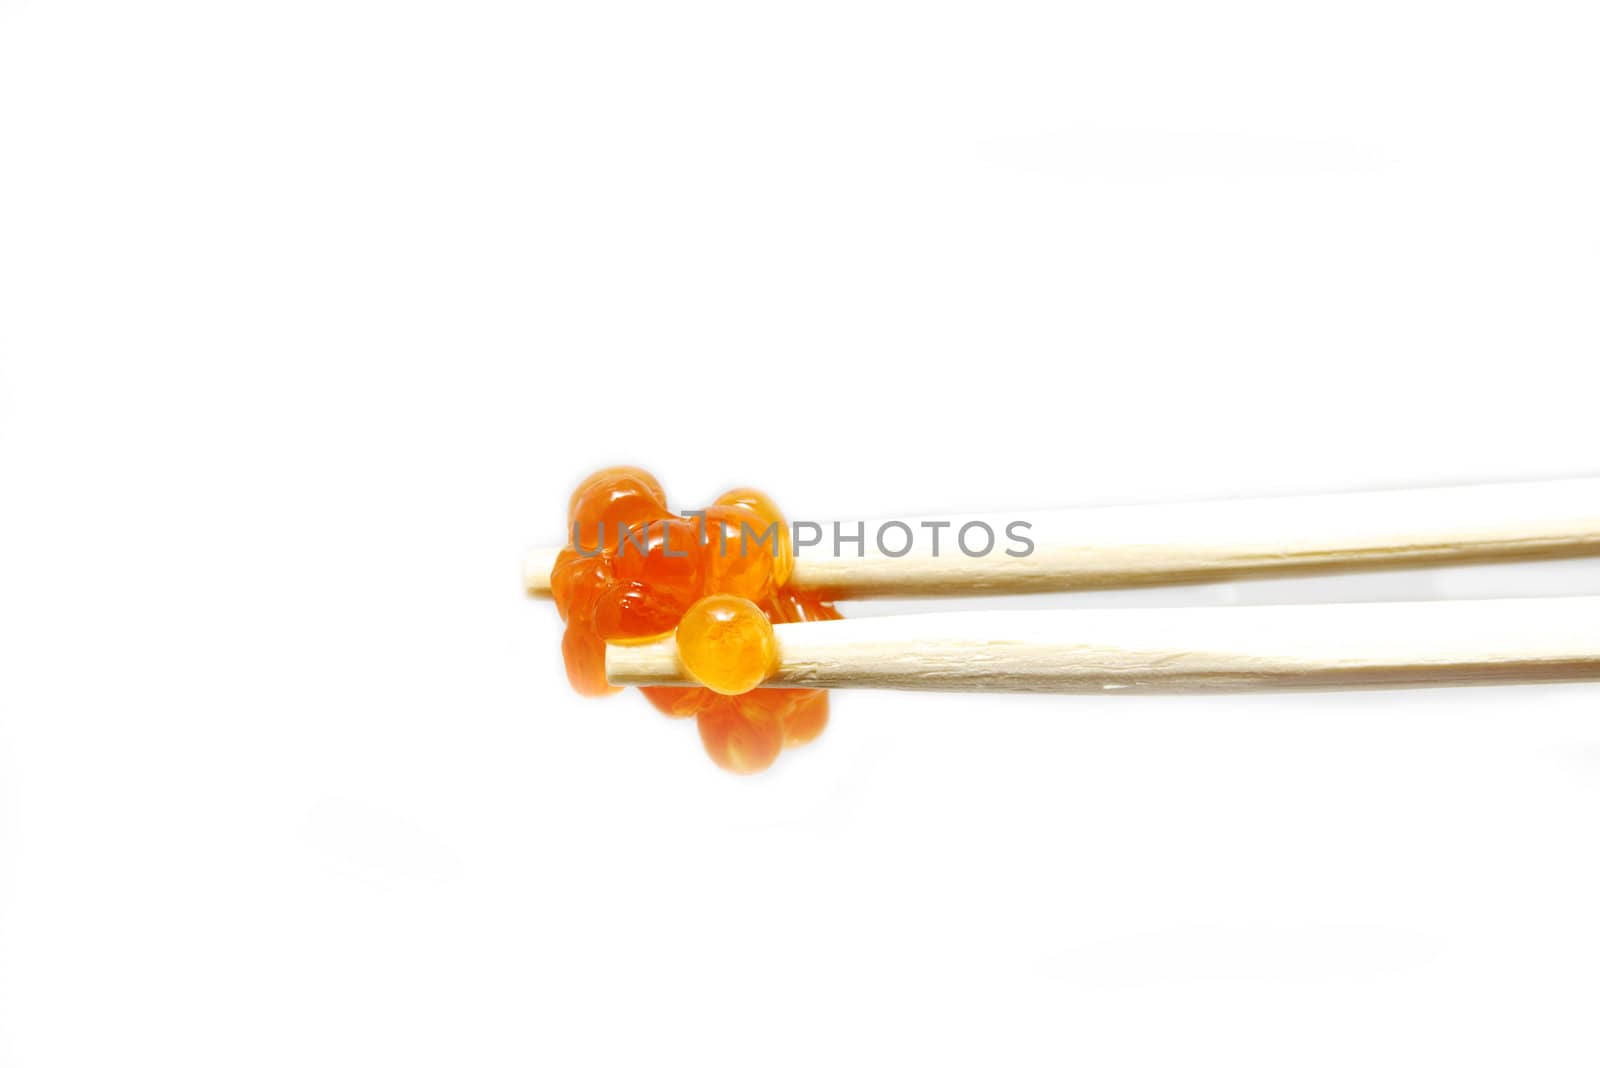 eggs on the chopsticks on a white background